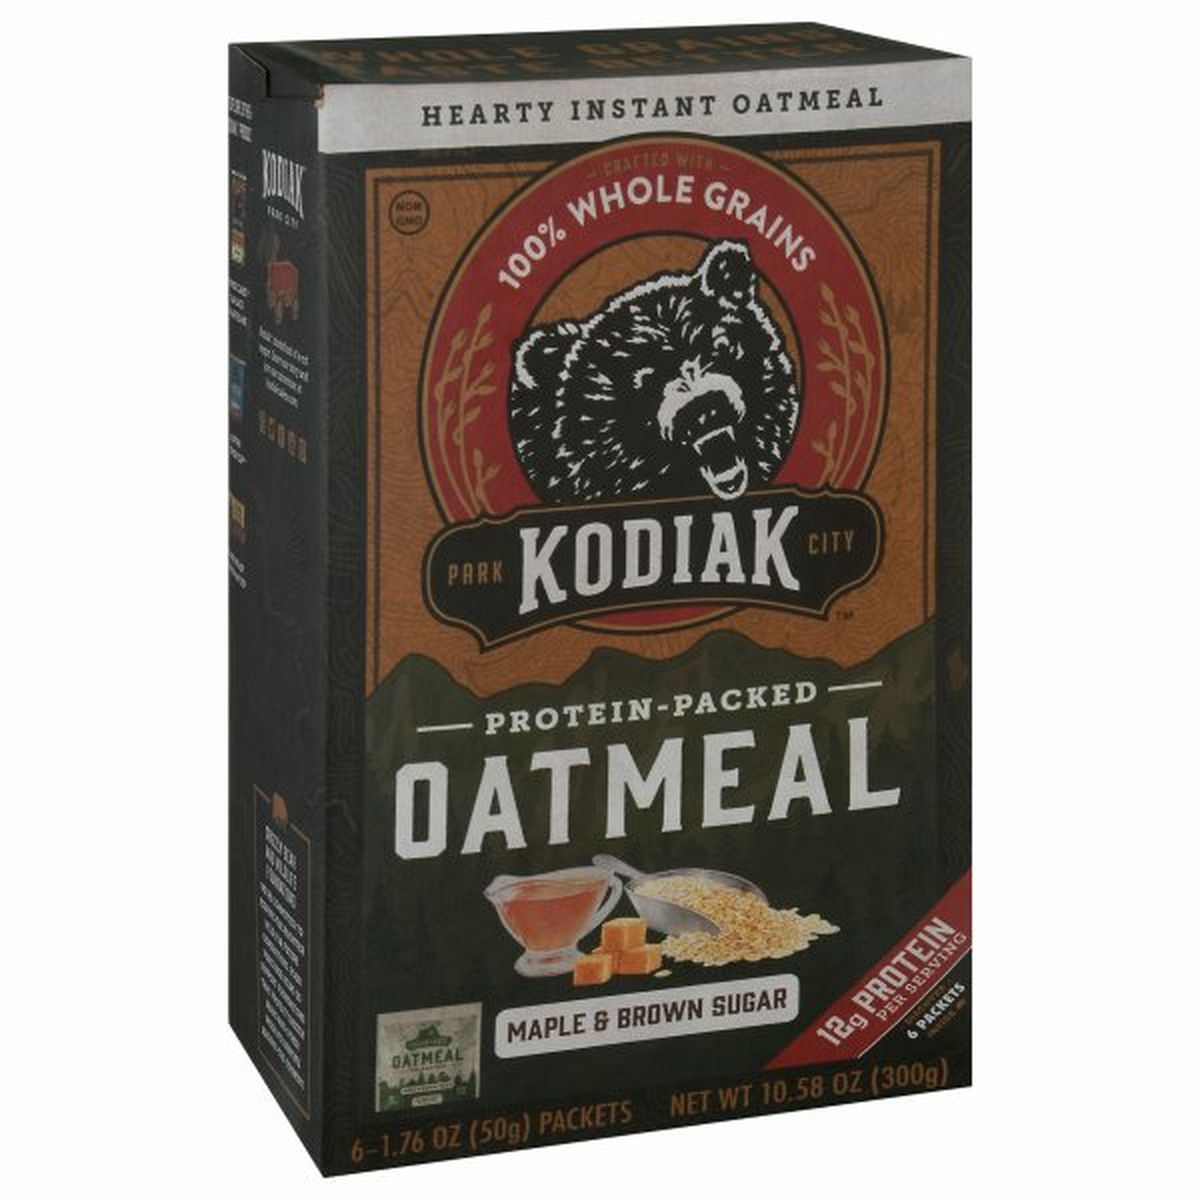 Calories in Kodiak Oatmeal, Maple & Brown Sugar, Protein-Packed